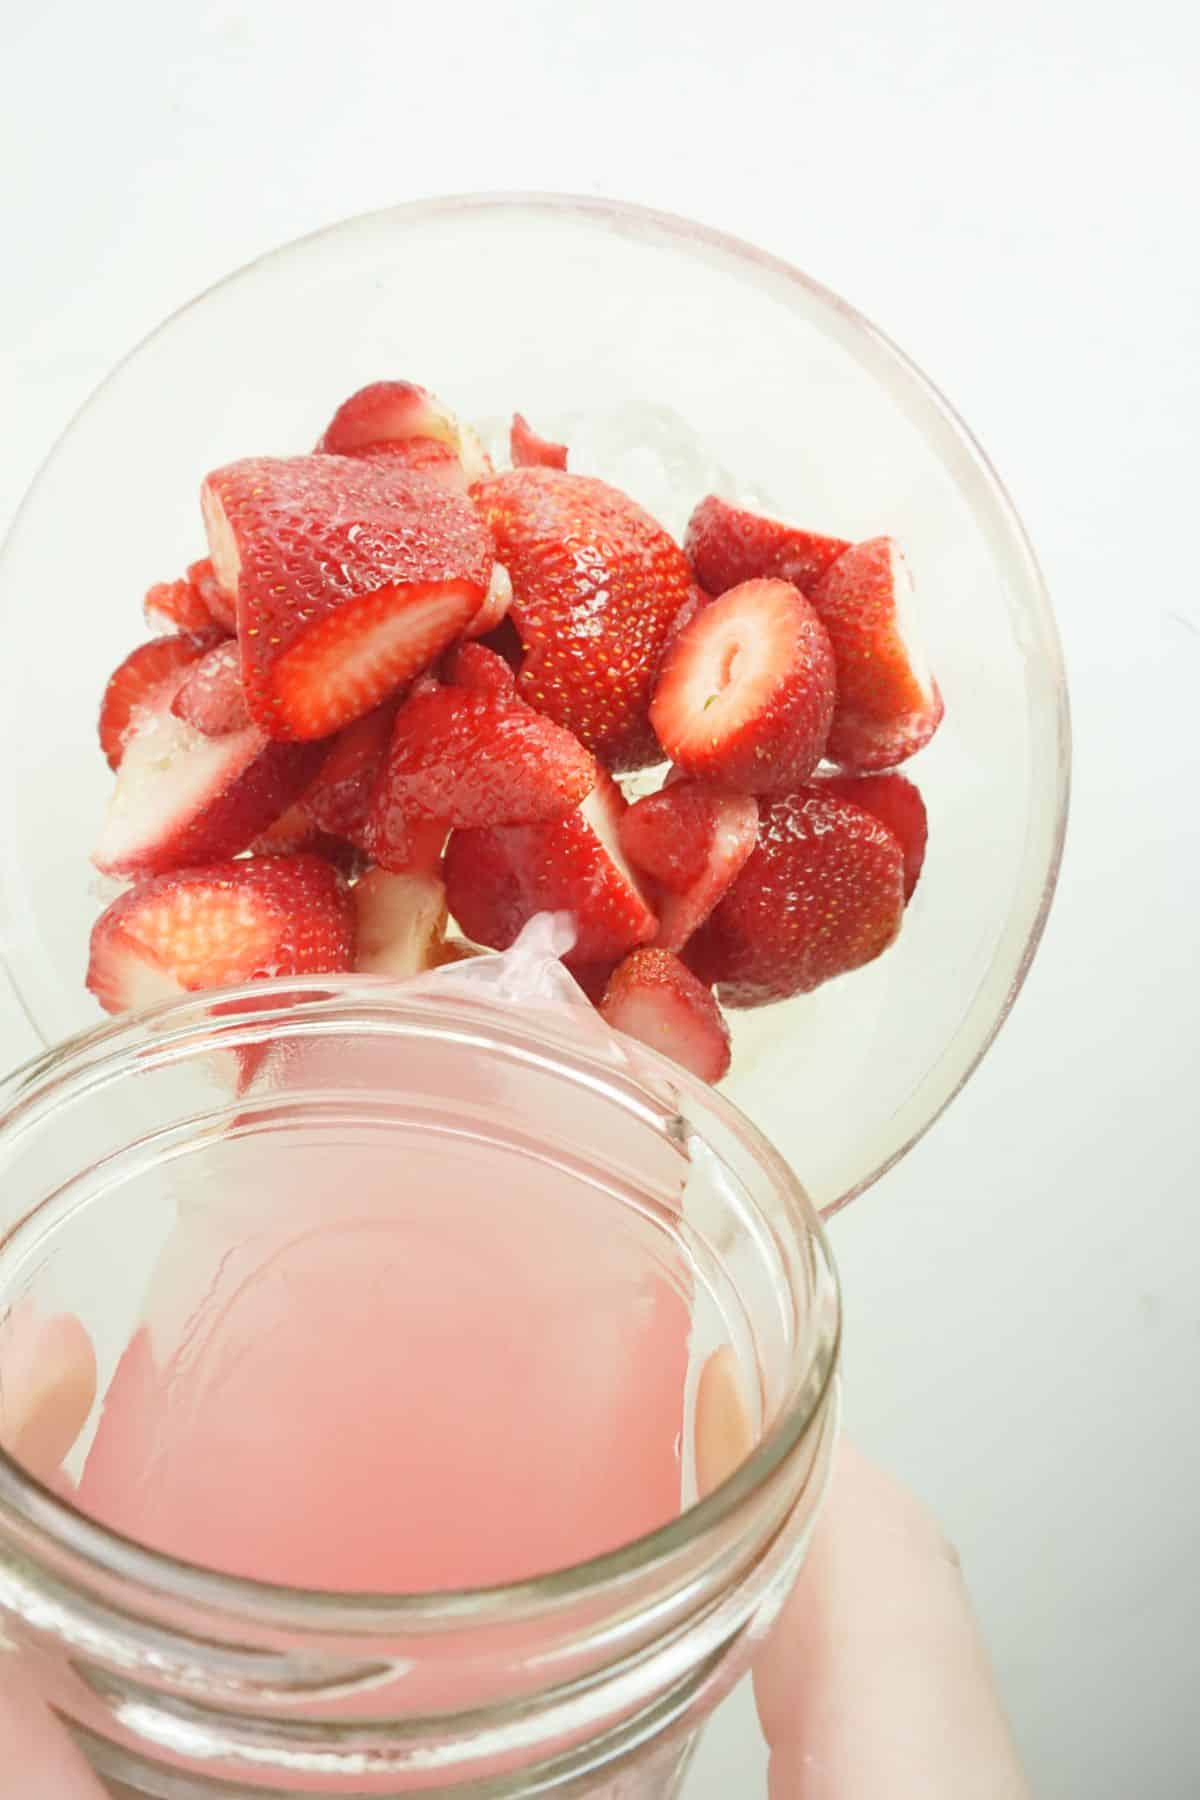 strawberry lemonade is being poured from a glass jar into a glass bowl of strawberries.